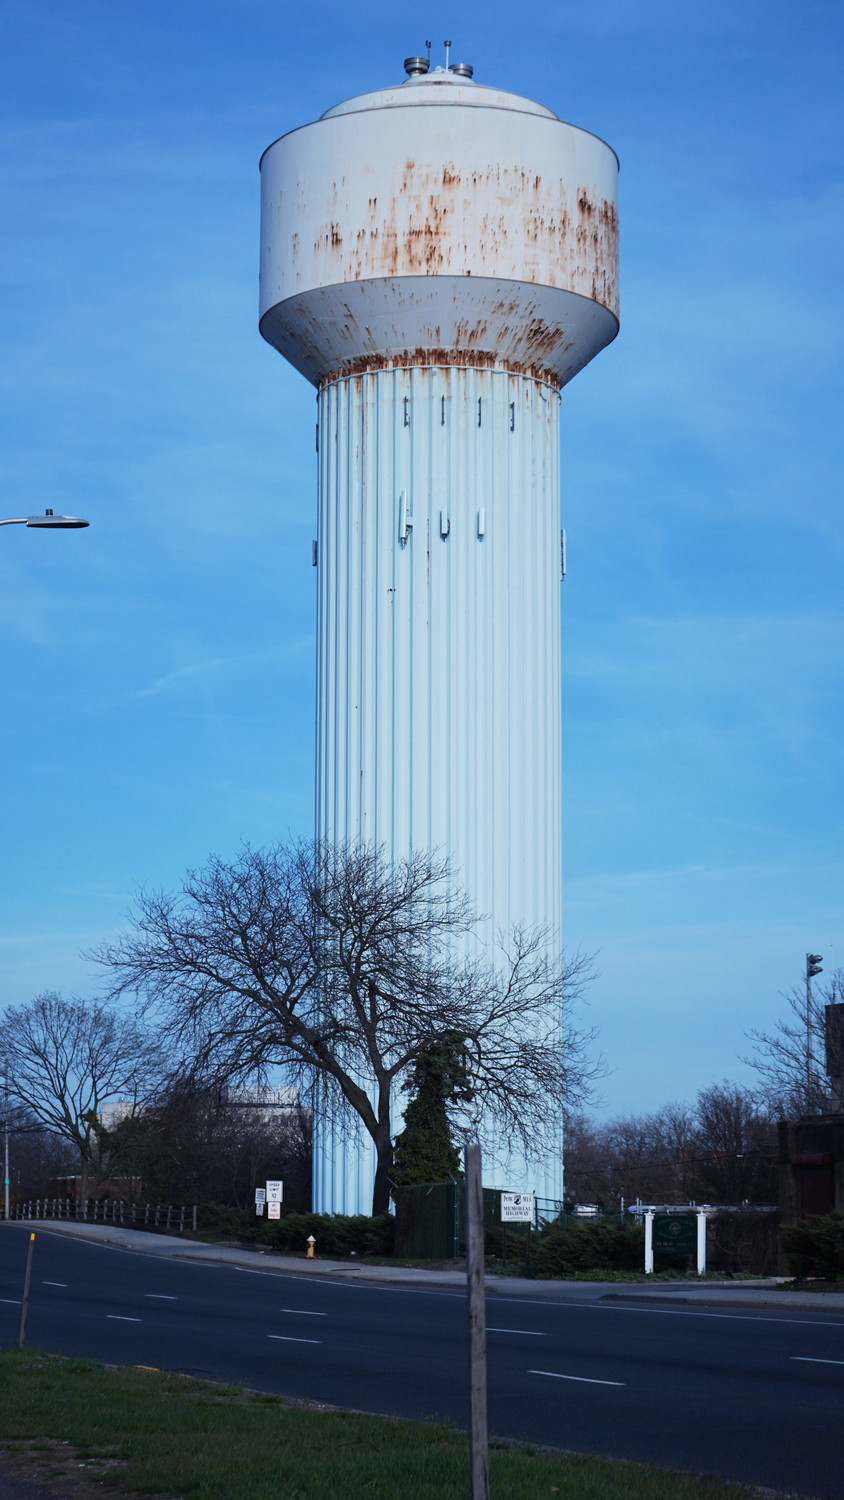 Water tower to be repainted in 2019, village says Herald Community